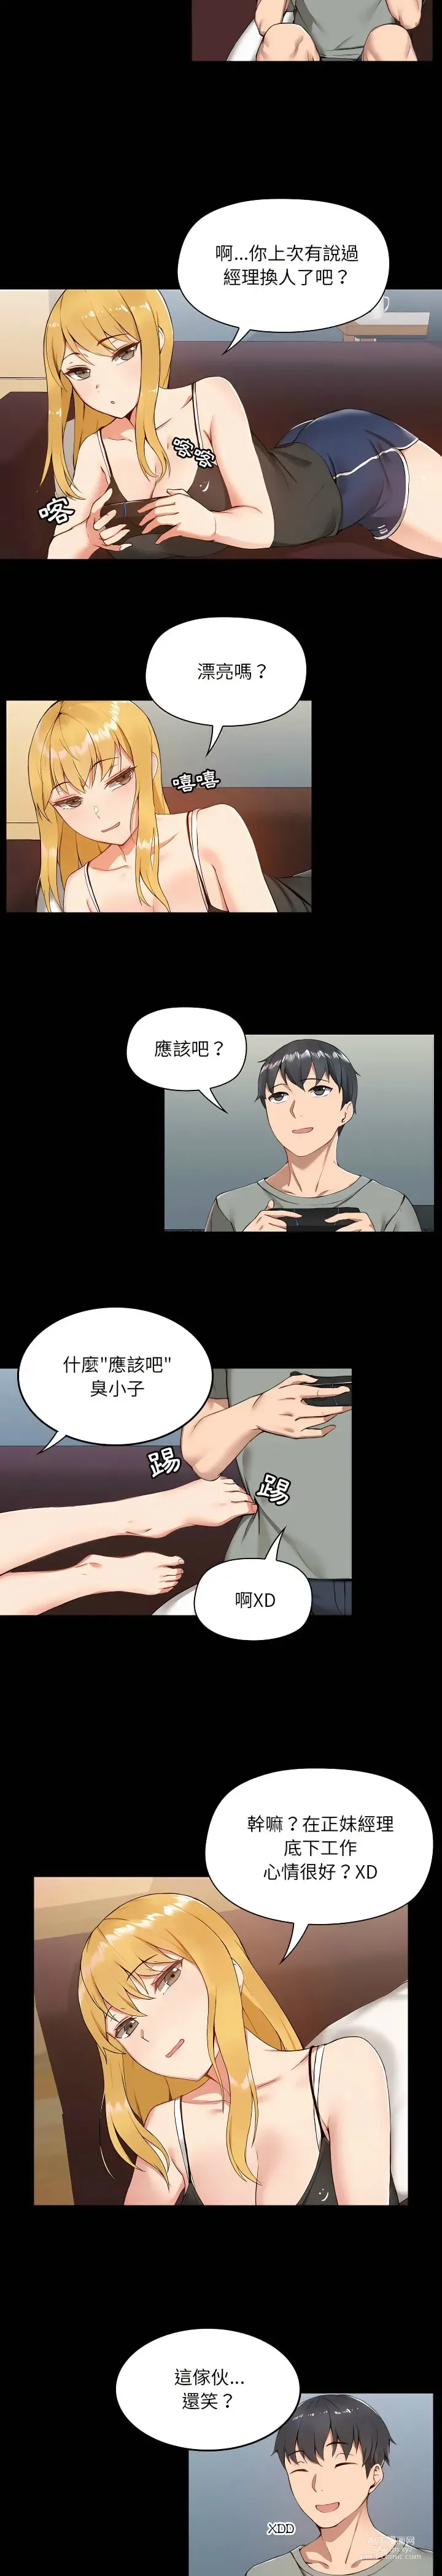 Page 8 of manga 爱打游戏的姐姐／All About That Game Life